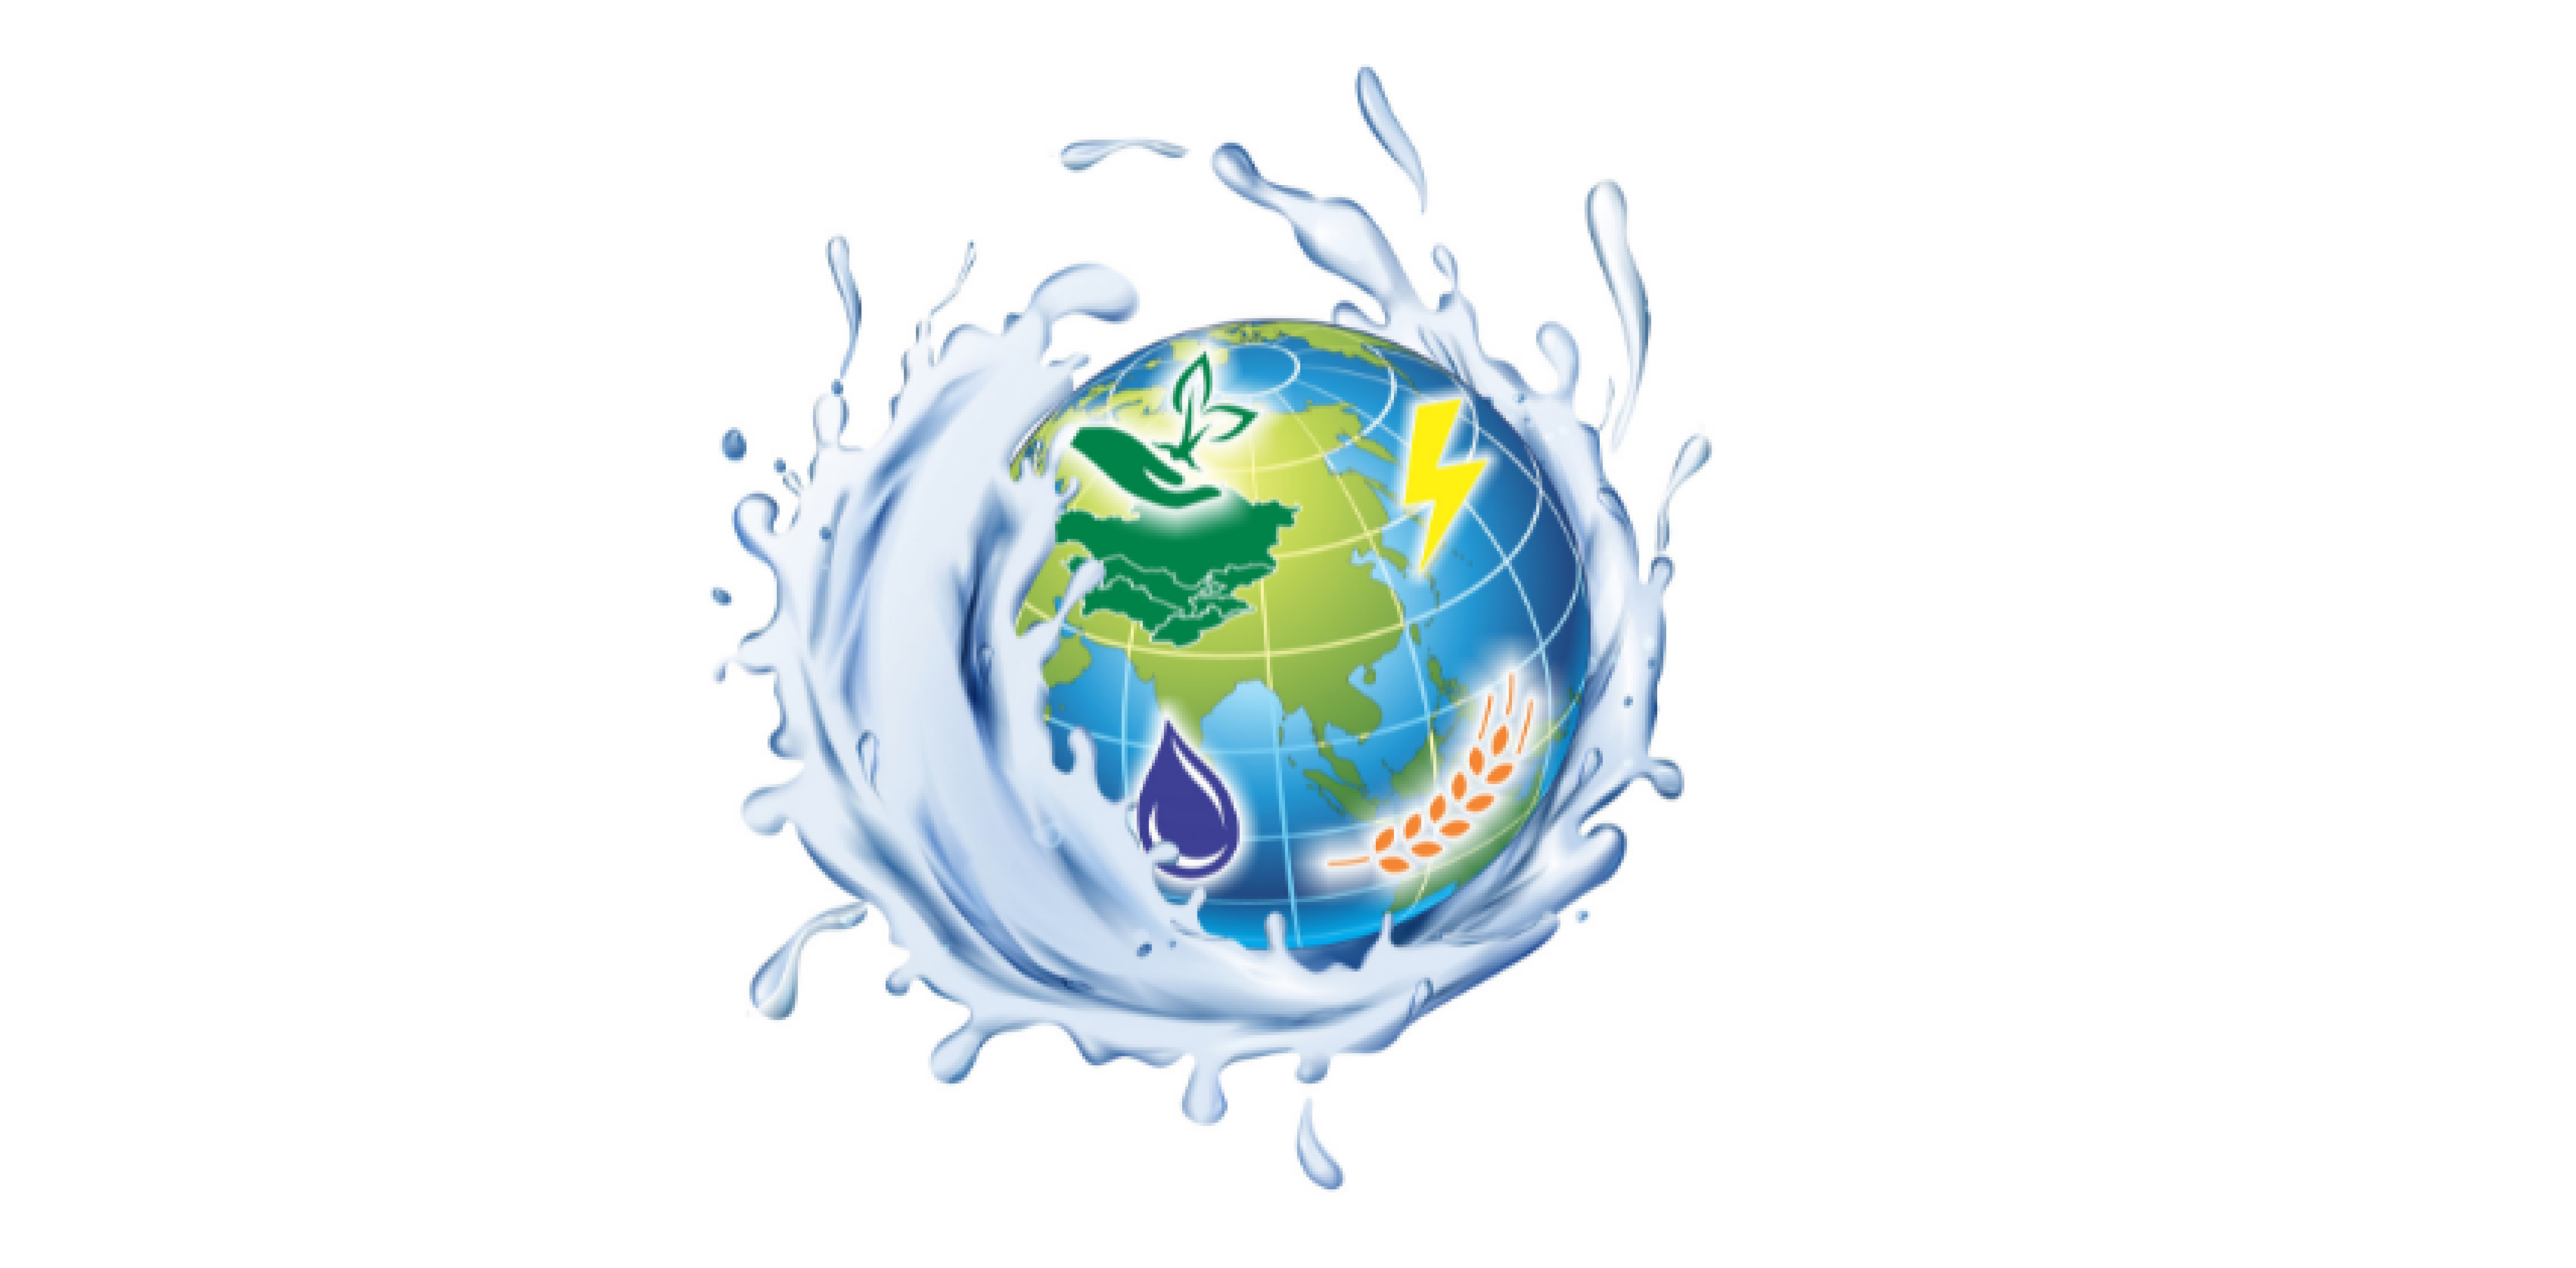 USAID Regional Water and Vulnerable Environment Activity reminds you about the research competition for citizens of Central Asia